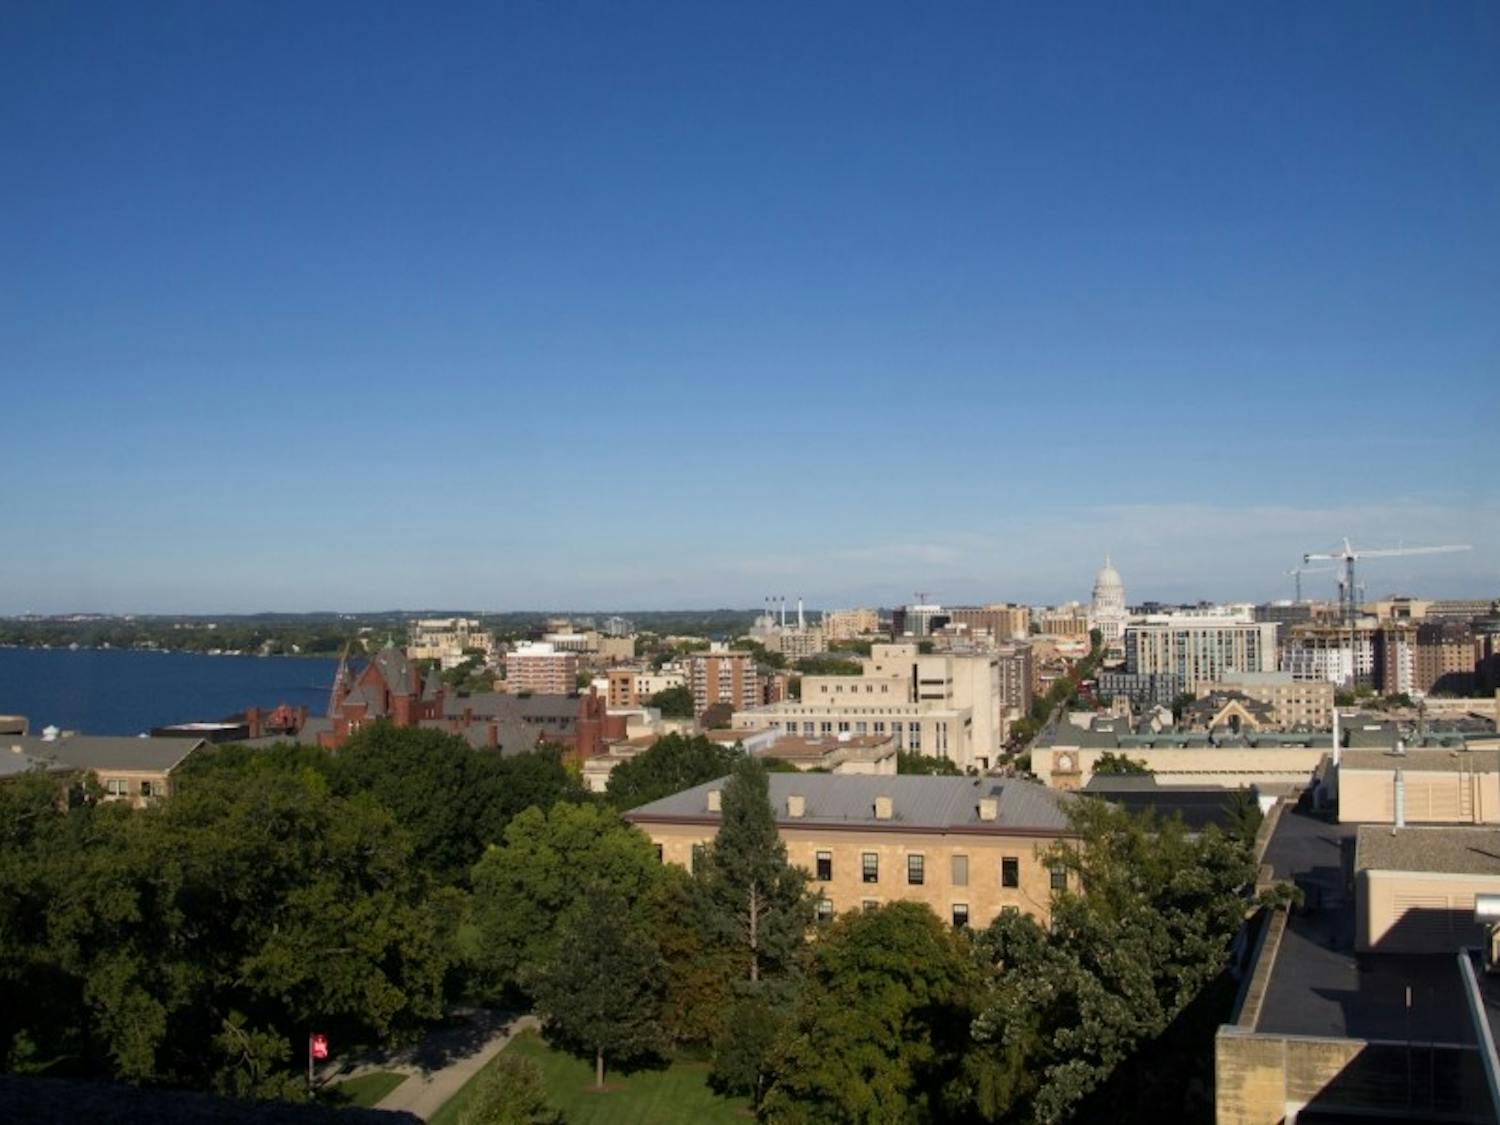 115 UW-Madison students, faculty and staff will be affected by President Donald Trump's executive order to ban immigrants from entering the U.S.